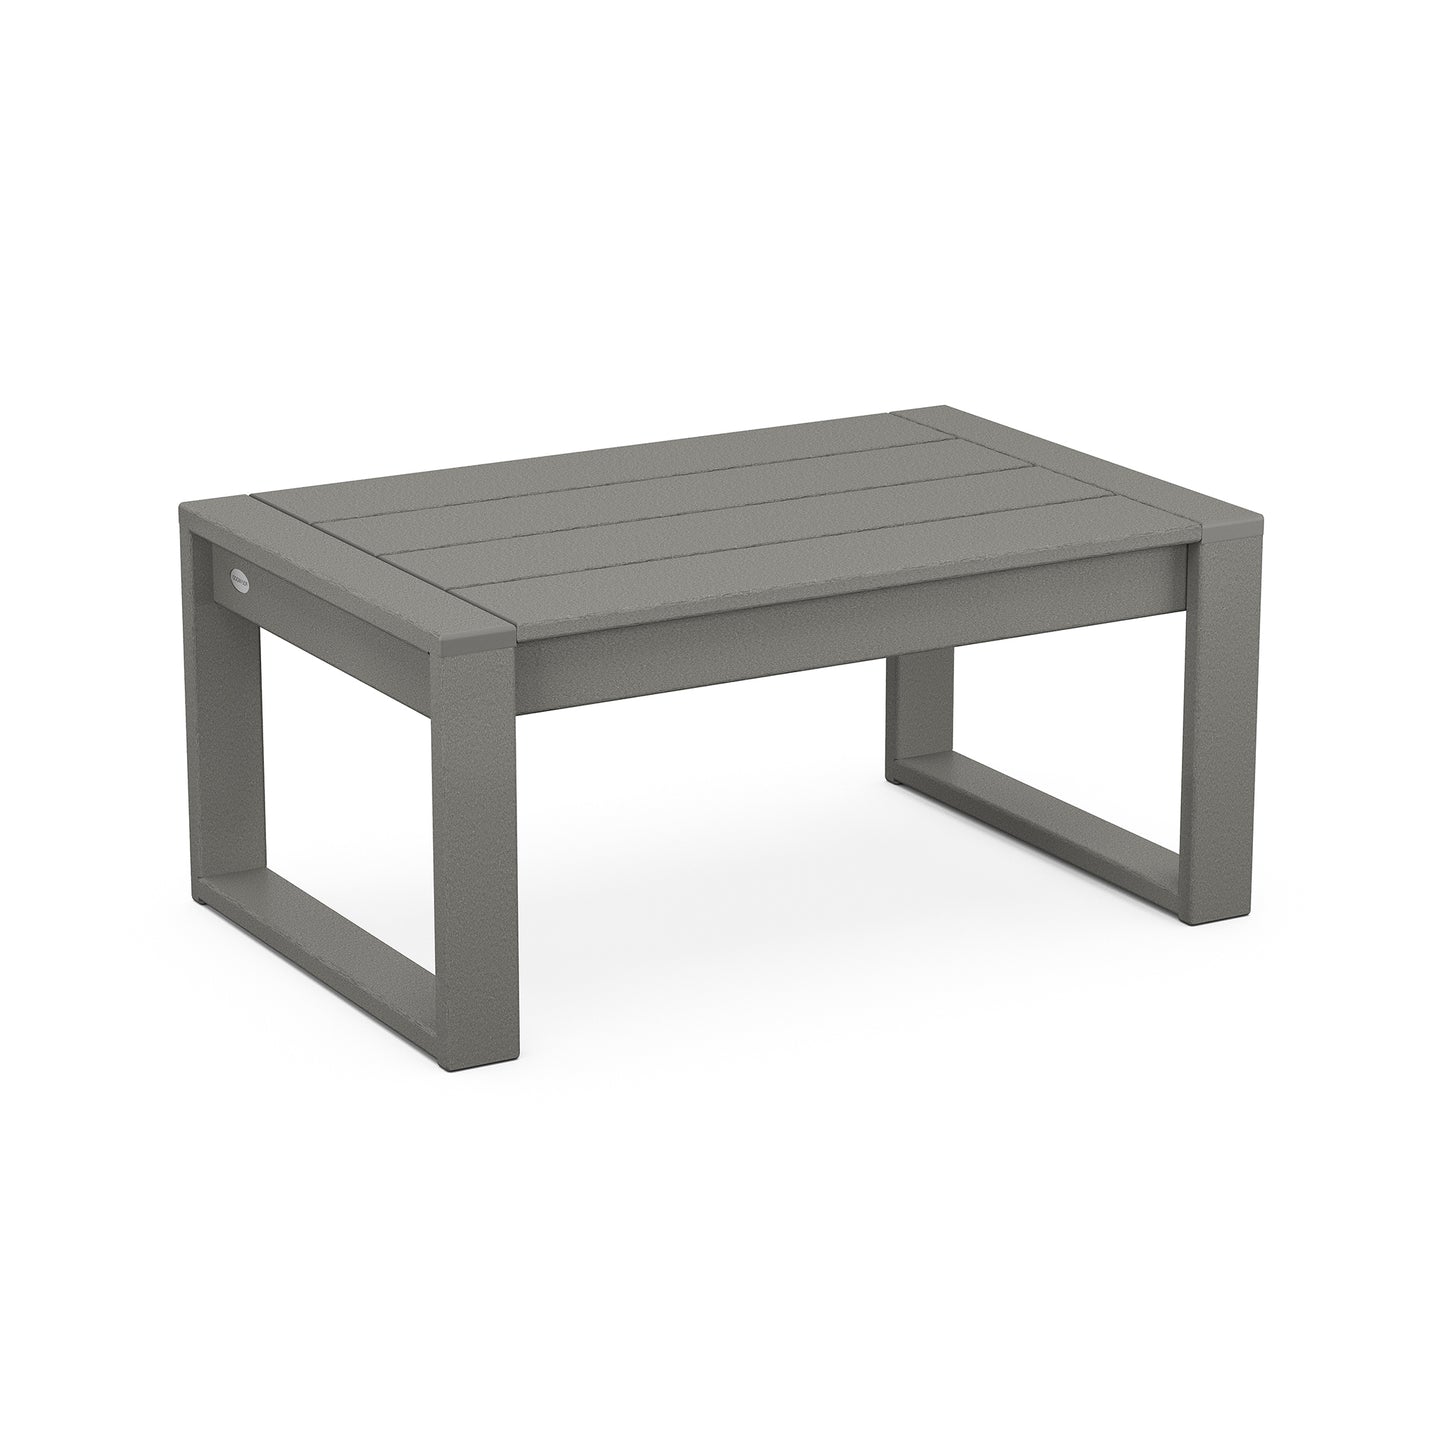 A 3D-rendered image of a simple, contemporary outdoor POLYWOOD EDGE Coffee Table in a solid grey color. The table has a rectangular top and a slightly recessed platform base made of POLYWOOD.